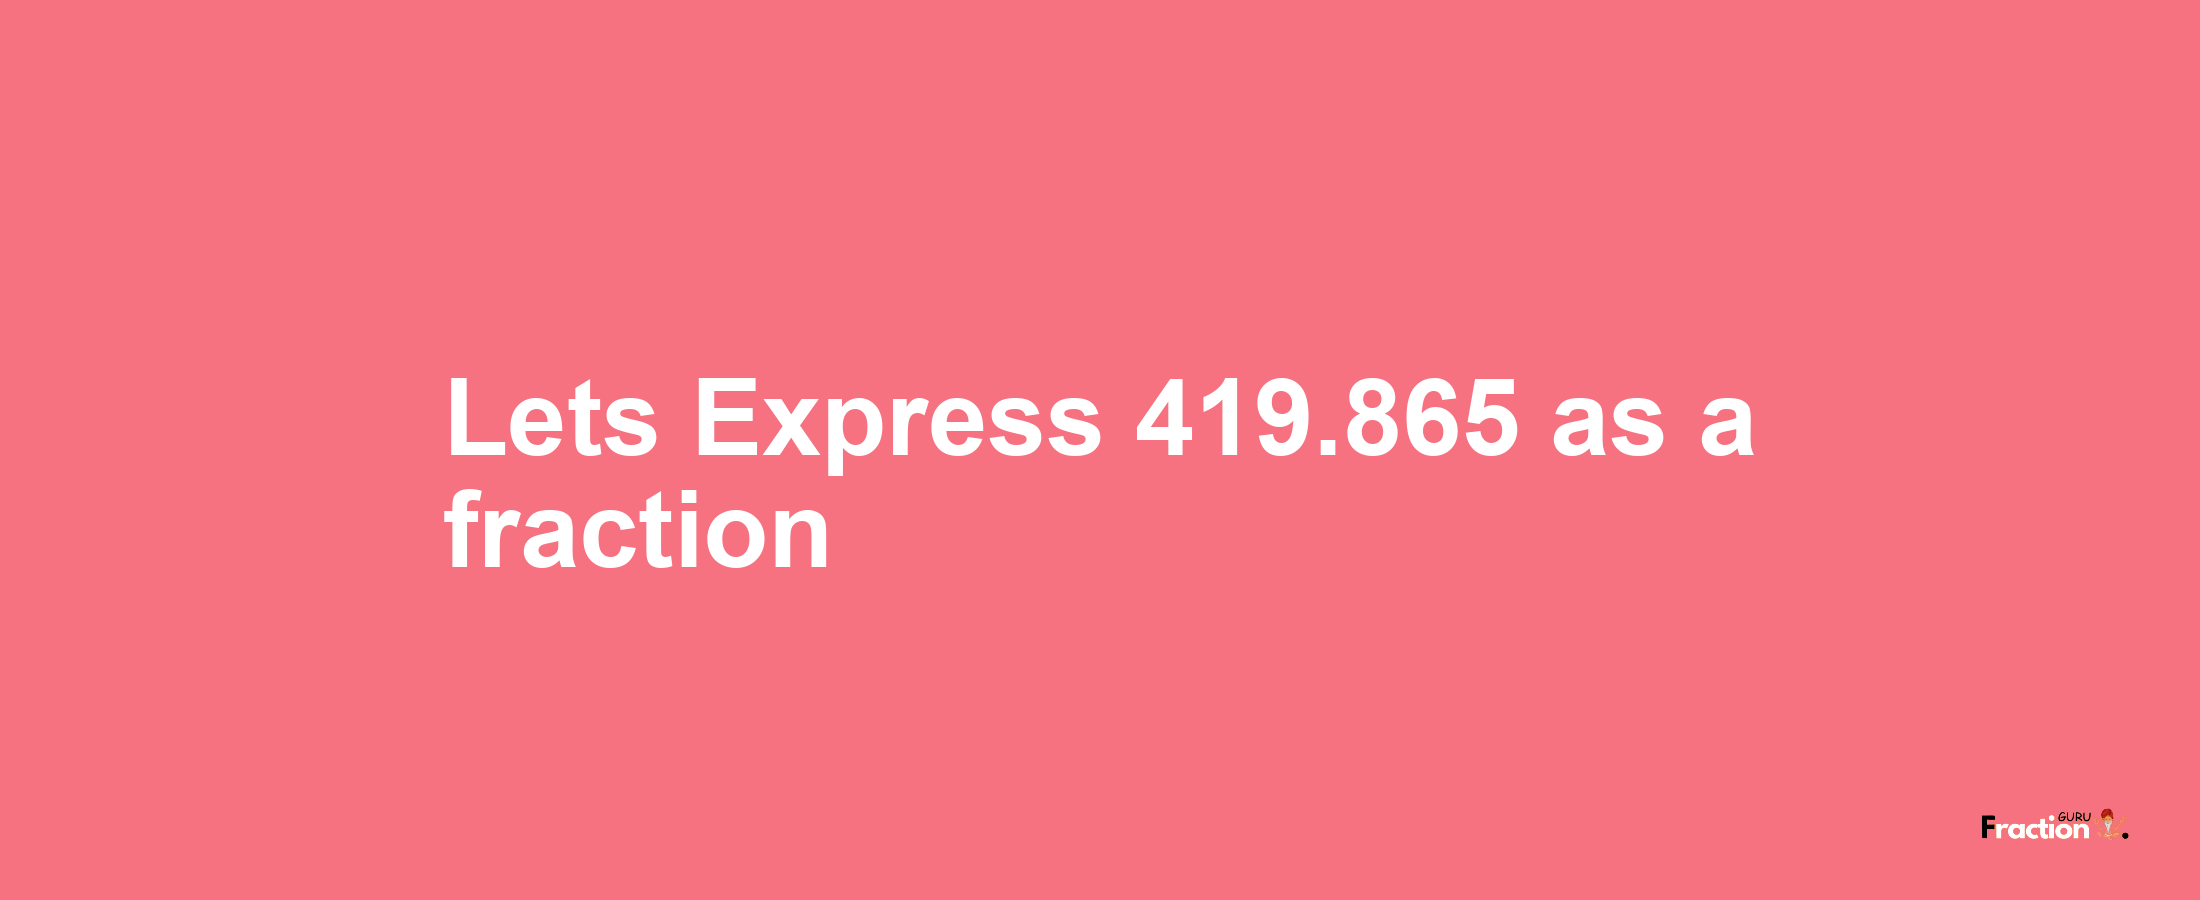 Lets Express 419.865 as afraction